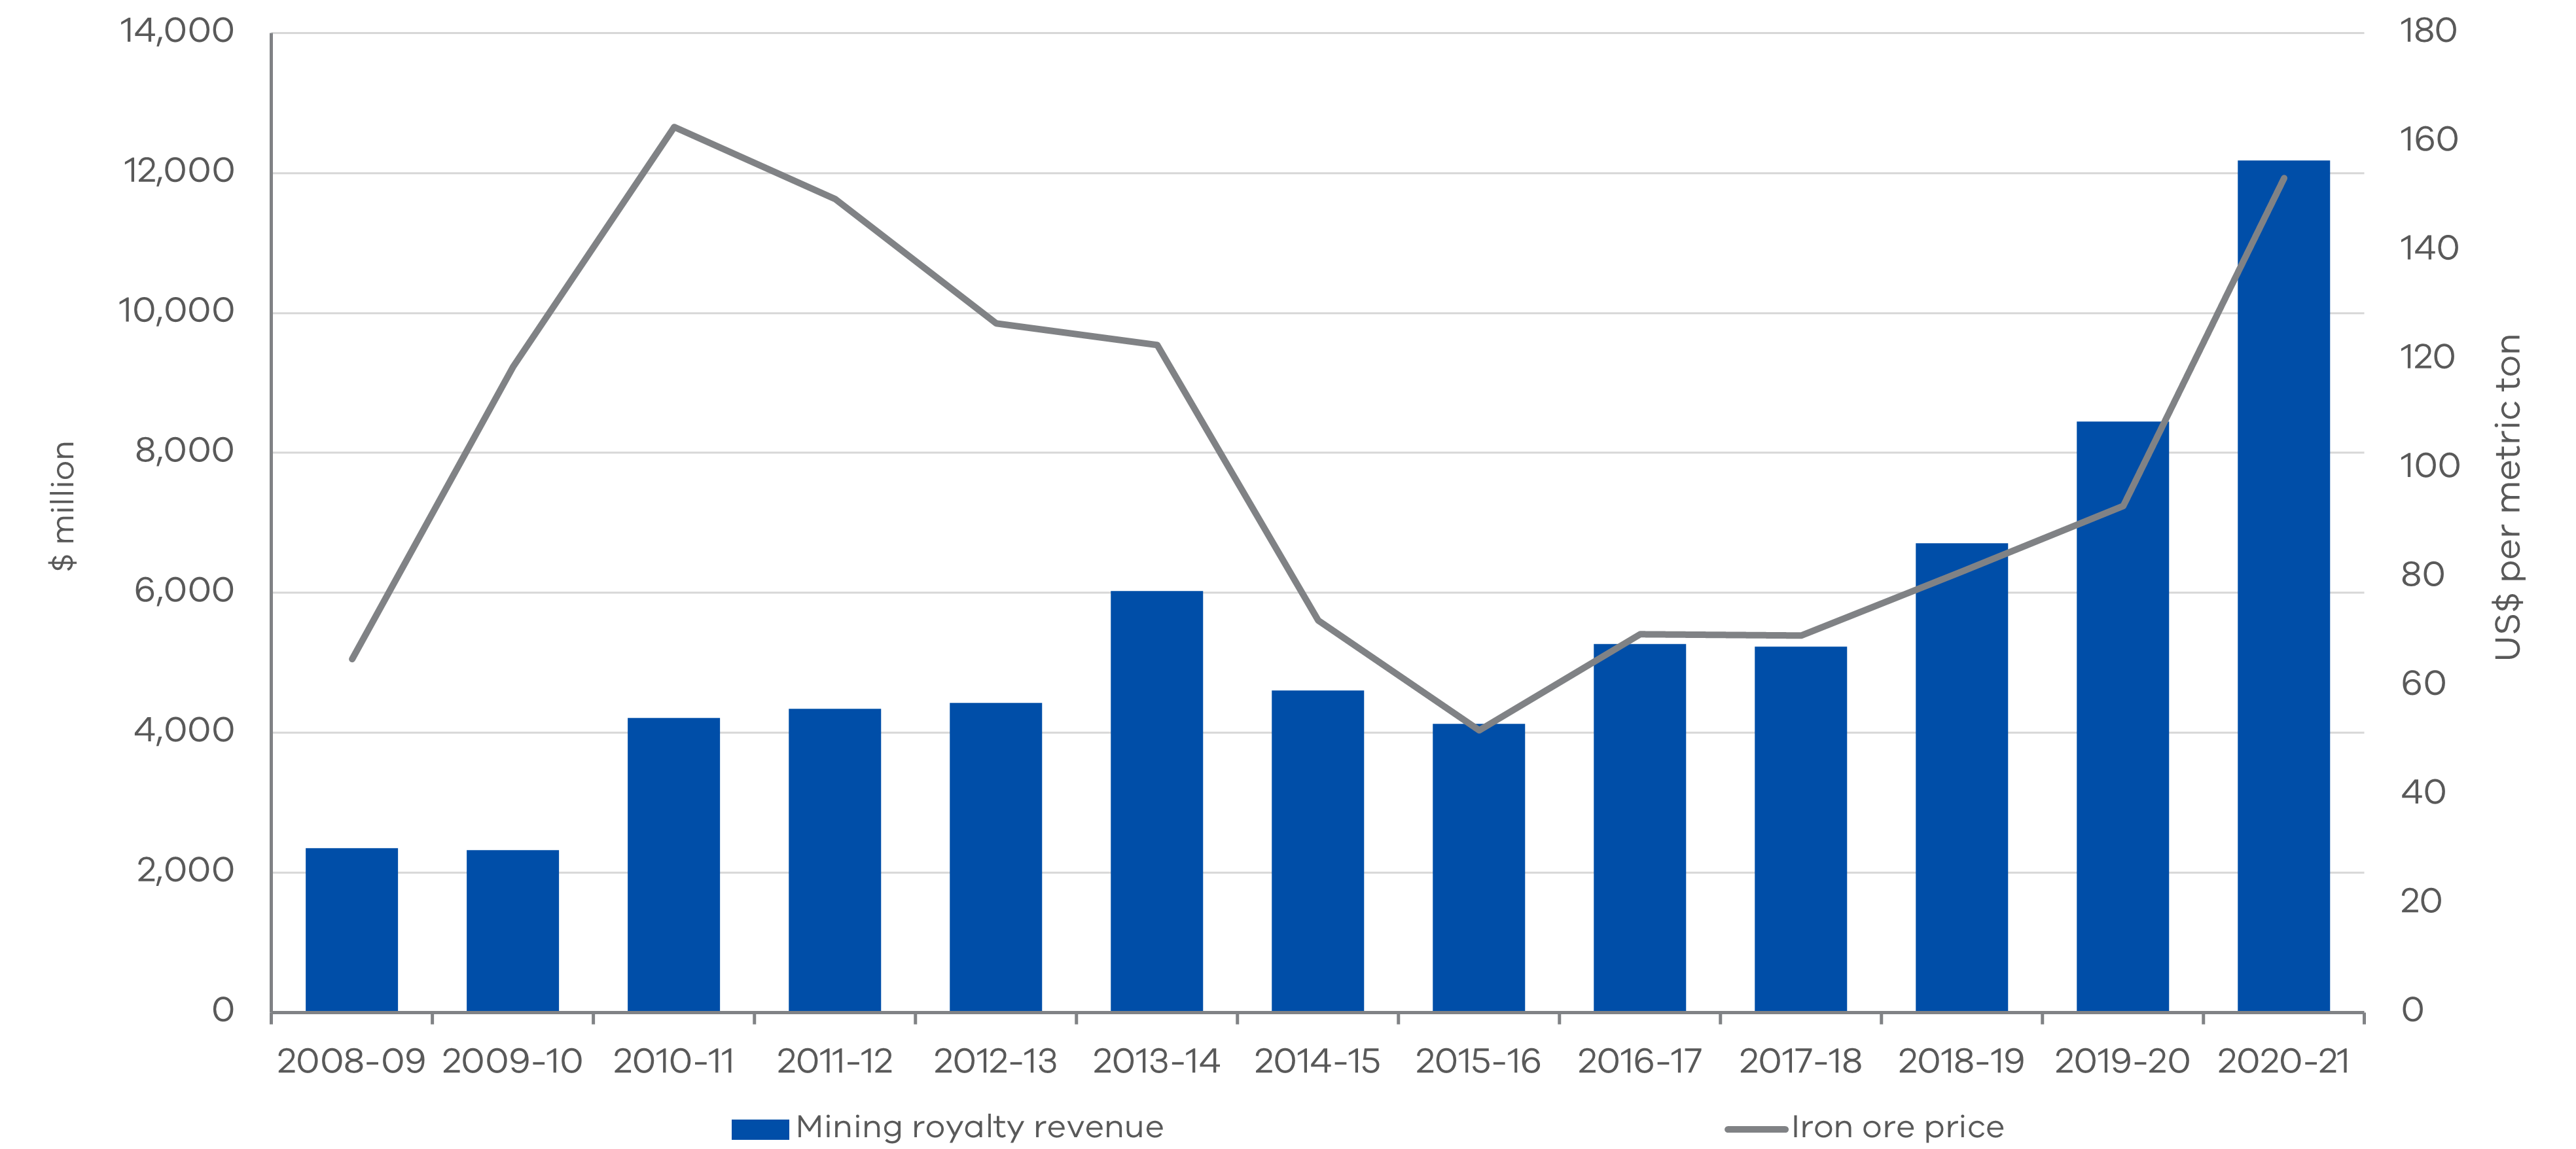 Figure 2 - Western Australian mining royalty revenues and the global price of iron ore from 2008-09 to 2020-21